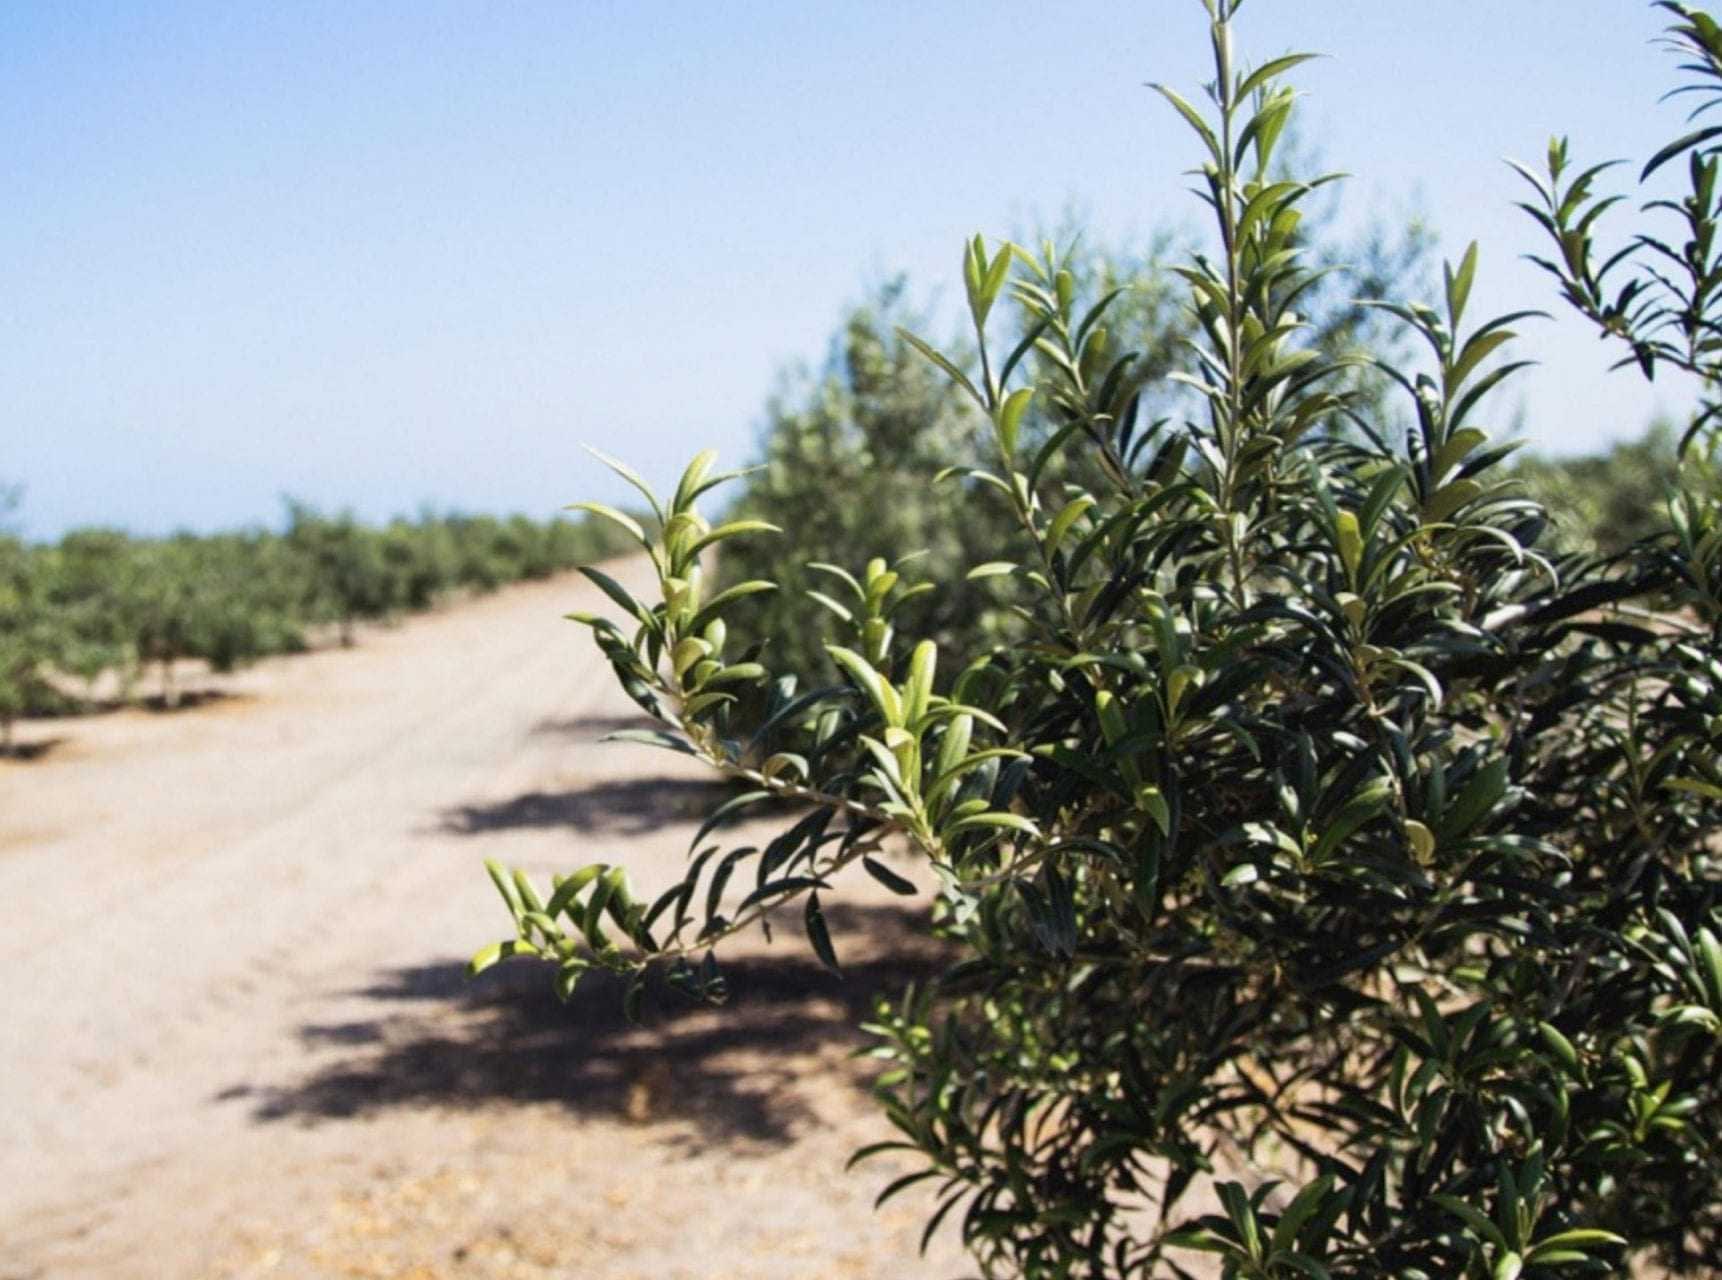 production-business-south-america-an-olive-harvest-in-peru-amid-sweeping-changes-olive-oil-times